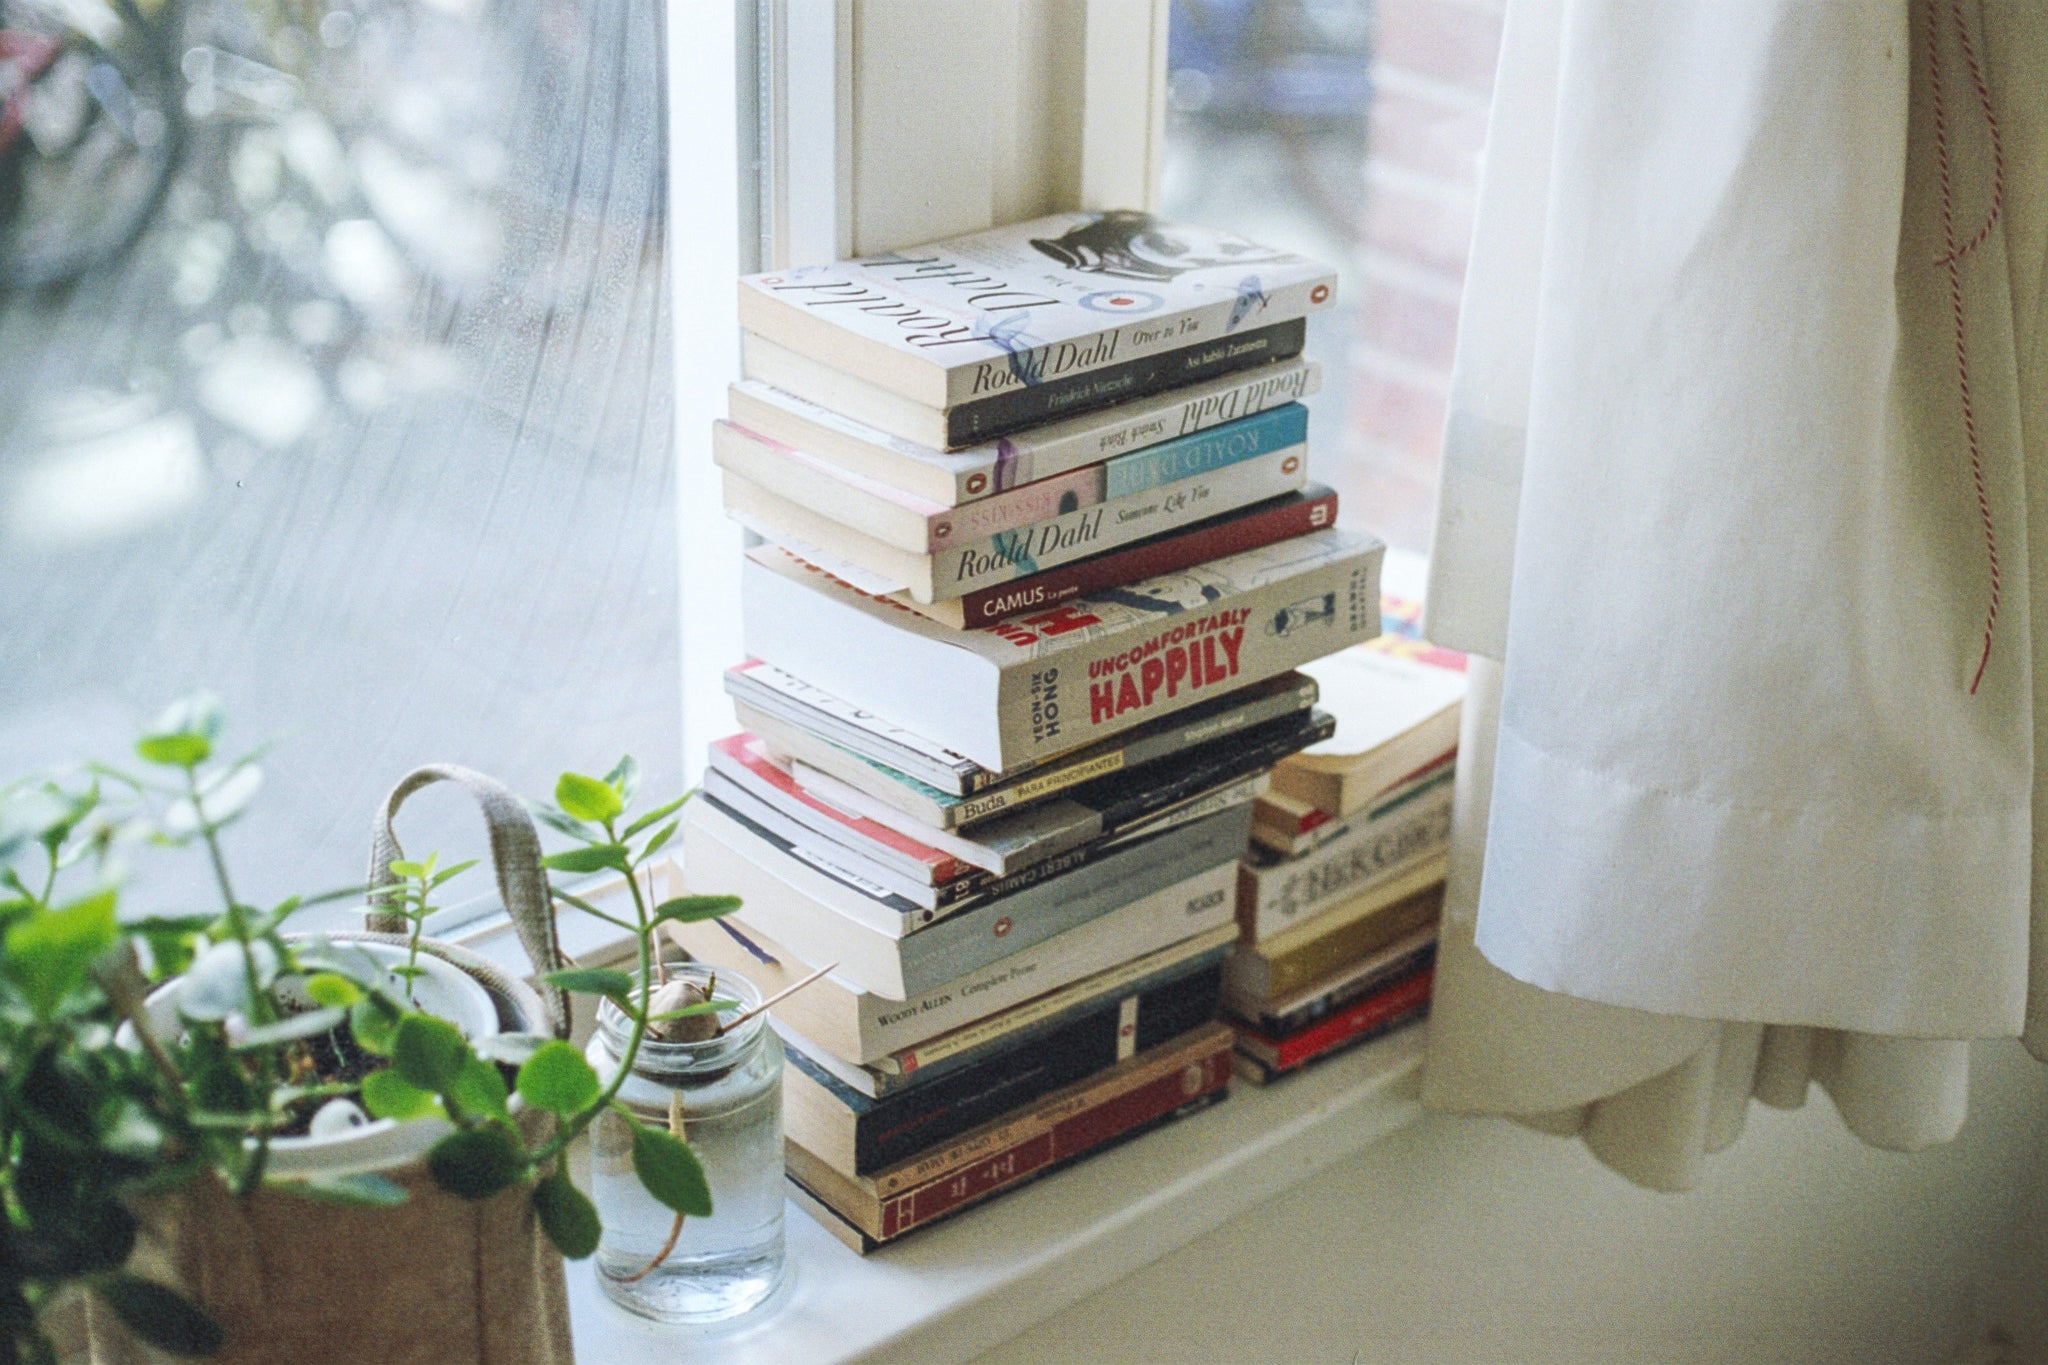 Pile of books on a shelf by a window next to a potted plant